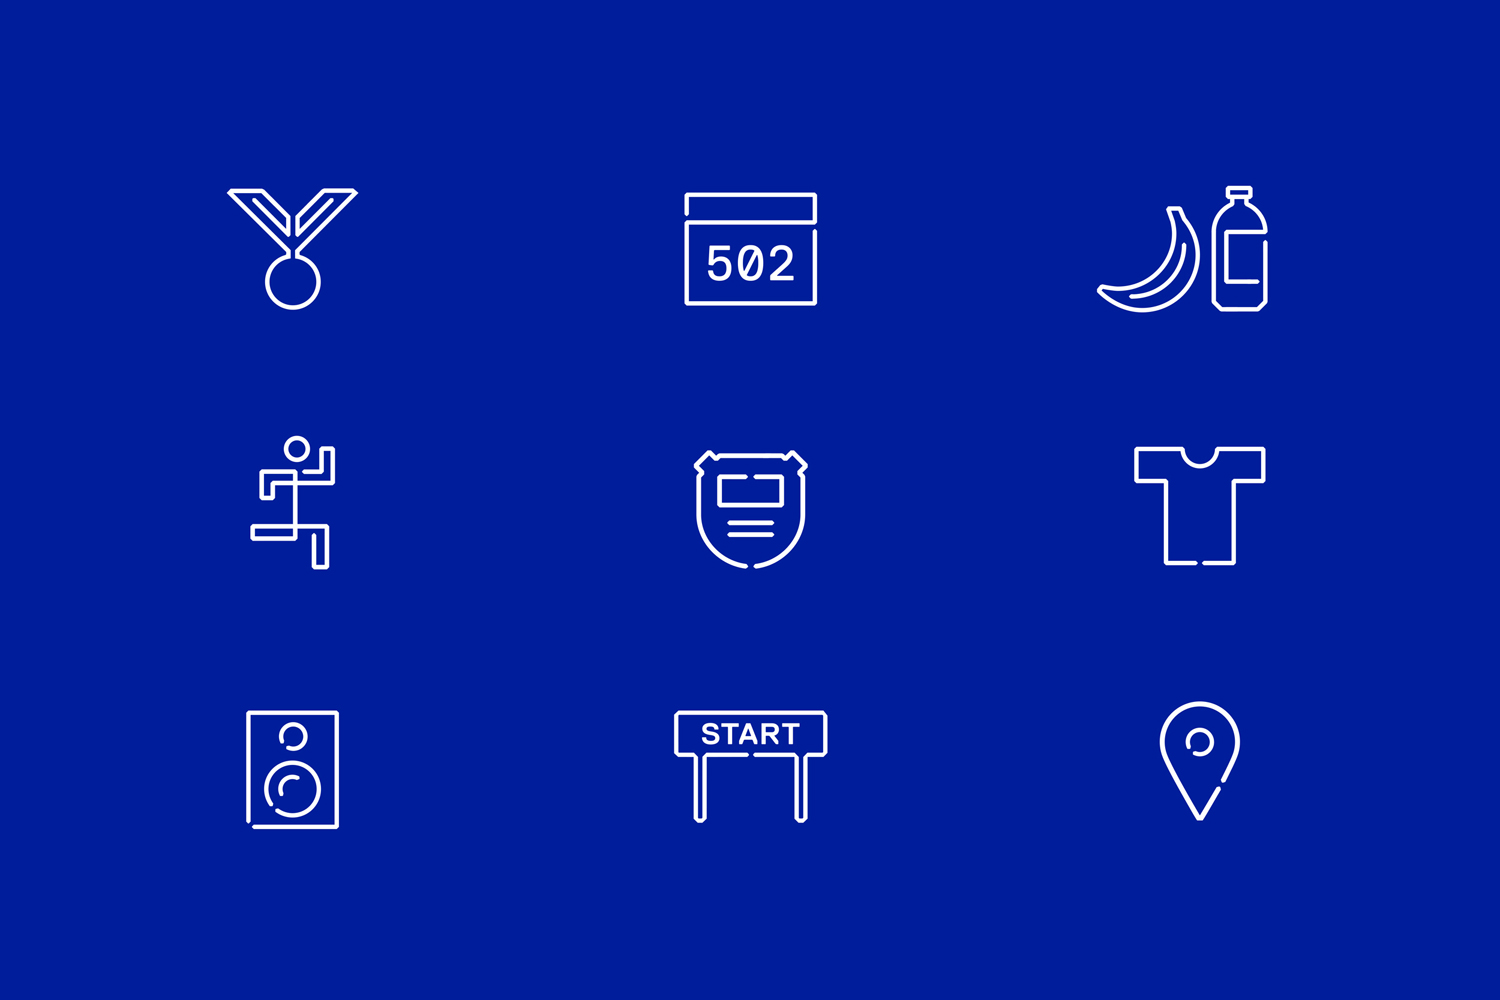 Icons by Perky Bros for Chicago-based independent race design and production company Run Mfg